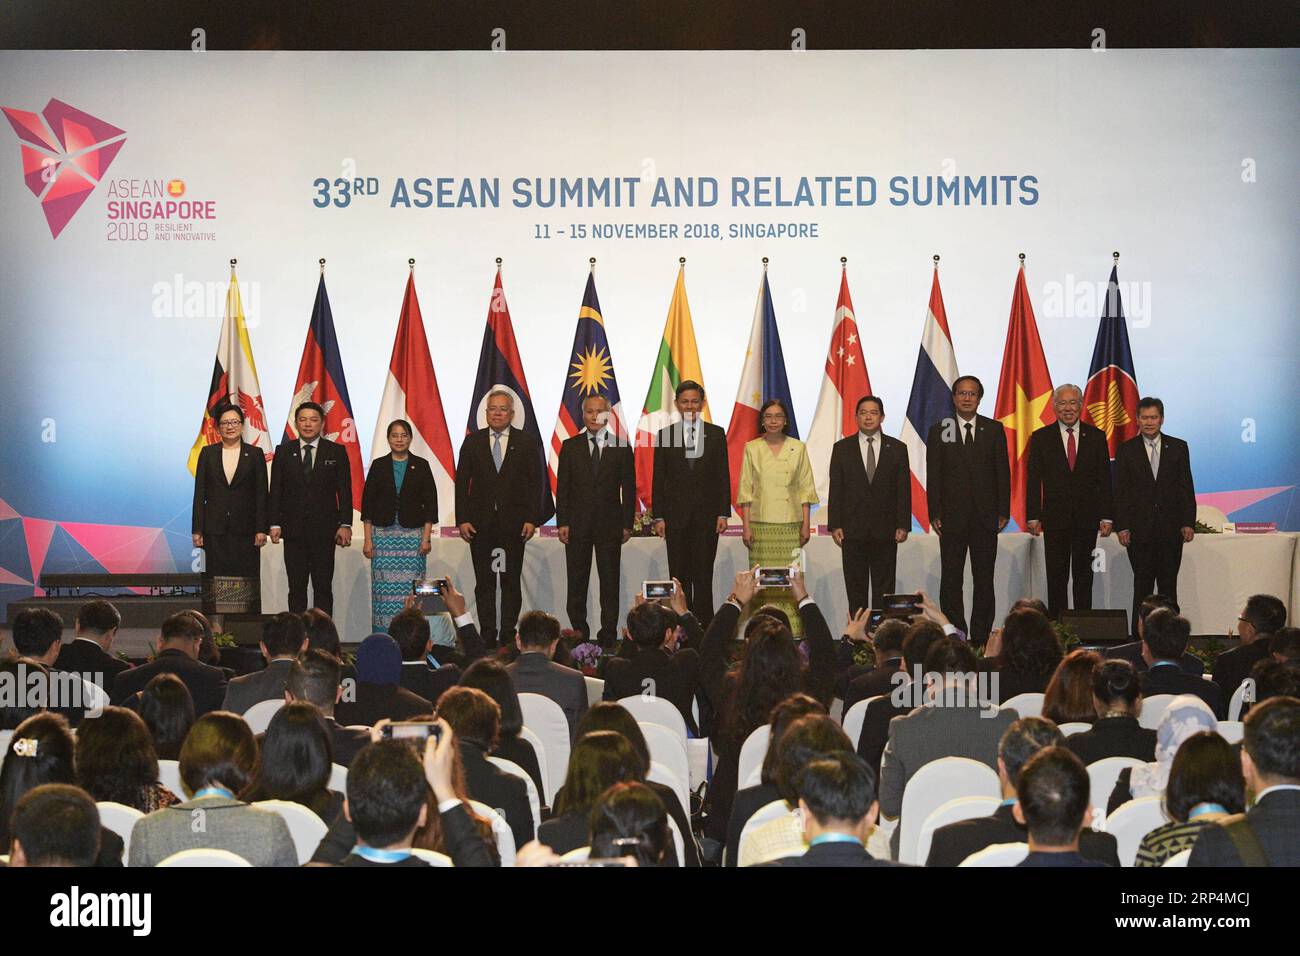 (181112) -- SINGAPORE, Nov. 12, 2018 -- Representatives attend the signing ceremony of ASEAN s agreement on e-commerce, in Singapore, on Nov. 12, 2018. Trade ministers of the Association of Southeast Asian Nations (ASEAN) member states signed an agreement on e-commerce on Monday, encouraging paperless trading between businesses and governments of the bloc to generate rapid and efficient transactions. ) (nxl) SINGAPORE-ASEAN-E-COMMERCE-AGREEMENT ThenxChihxWey PUBLICATIONxNOTxINxCHN Stock Photo